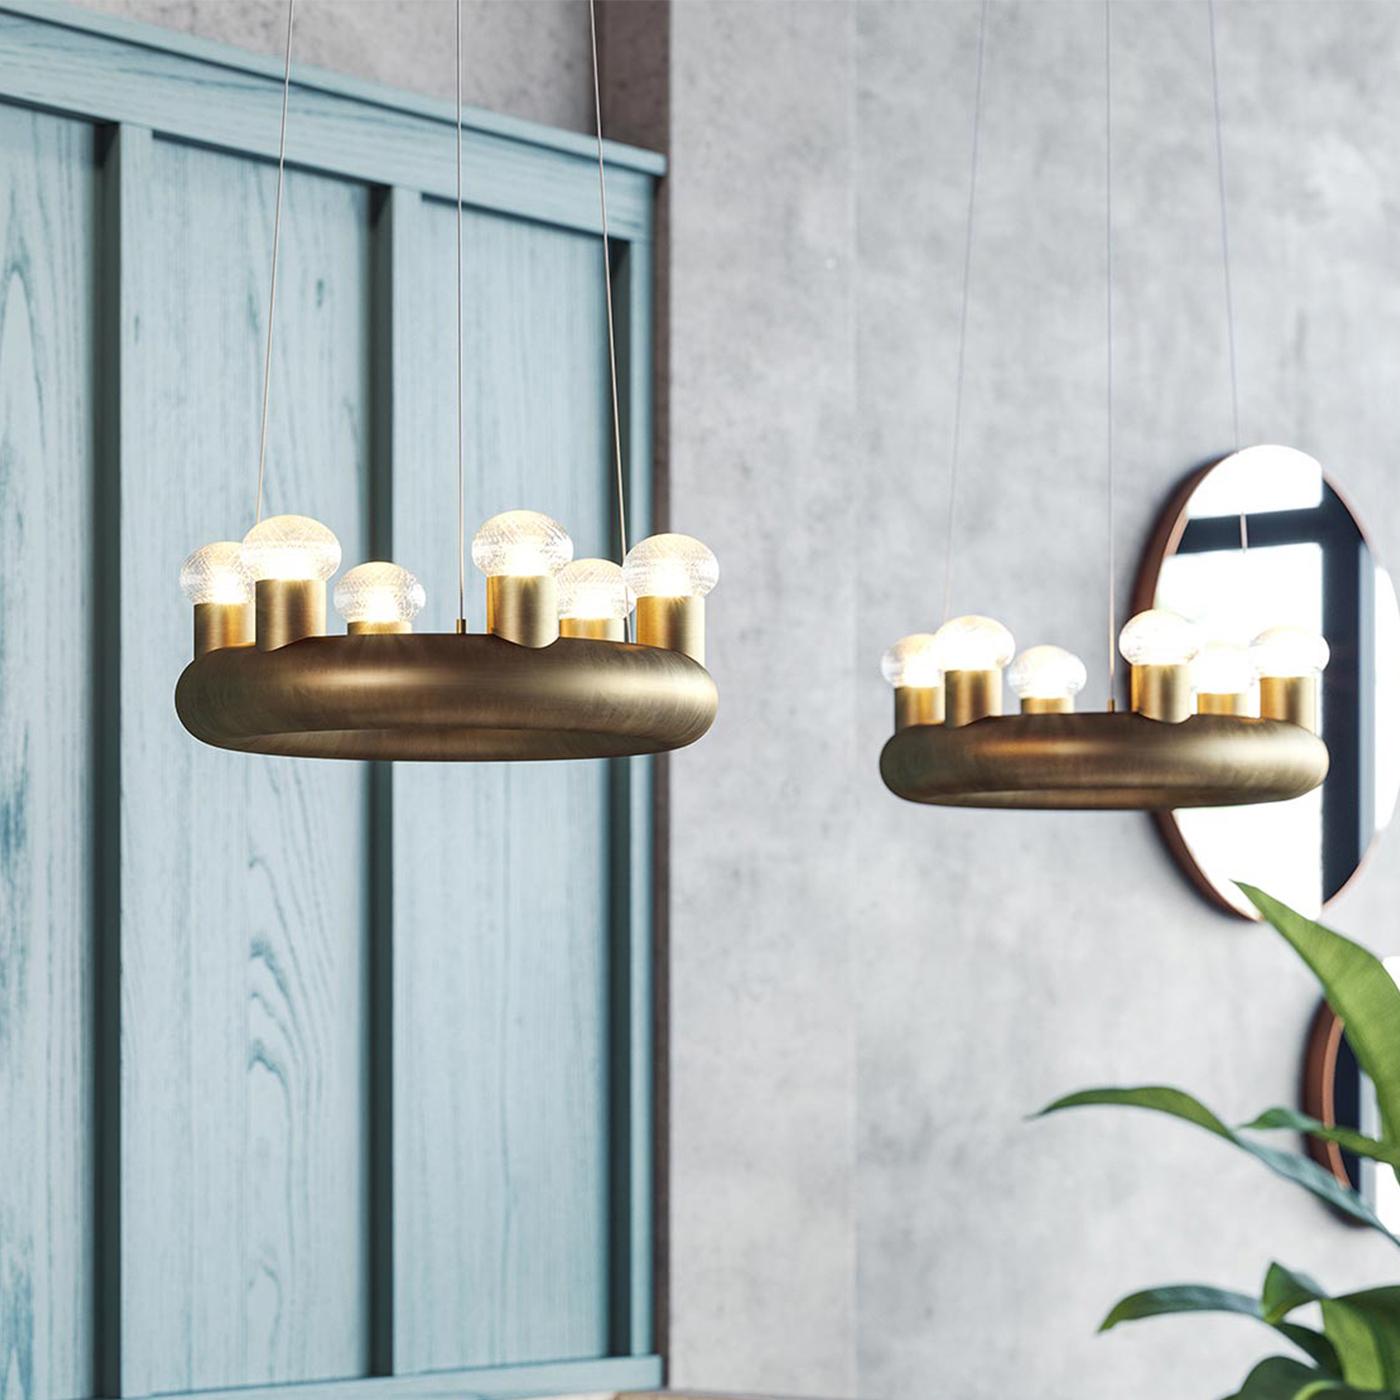 In the Middle Ages and during the Renaissance, illumination for the home was obtained by lighting candlesticks and oil lamps. Kingdom is the reinterpretation of this archetype of lamp, adapted to a contemporary flavor: a simple tubular ring from